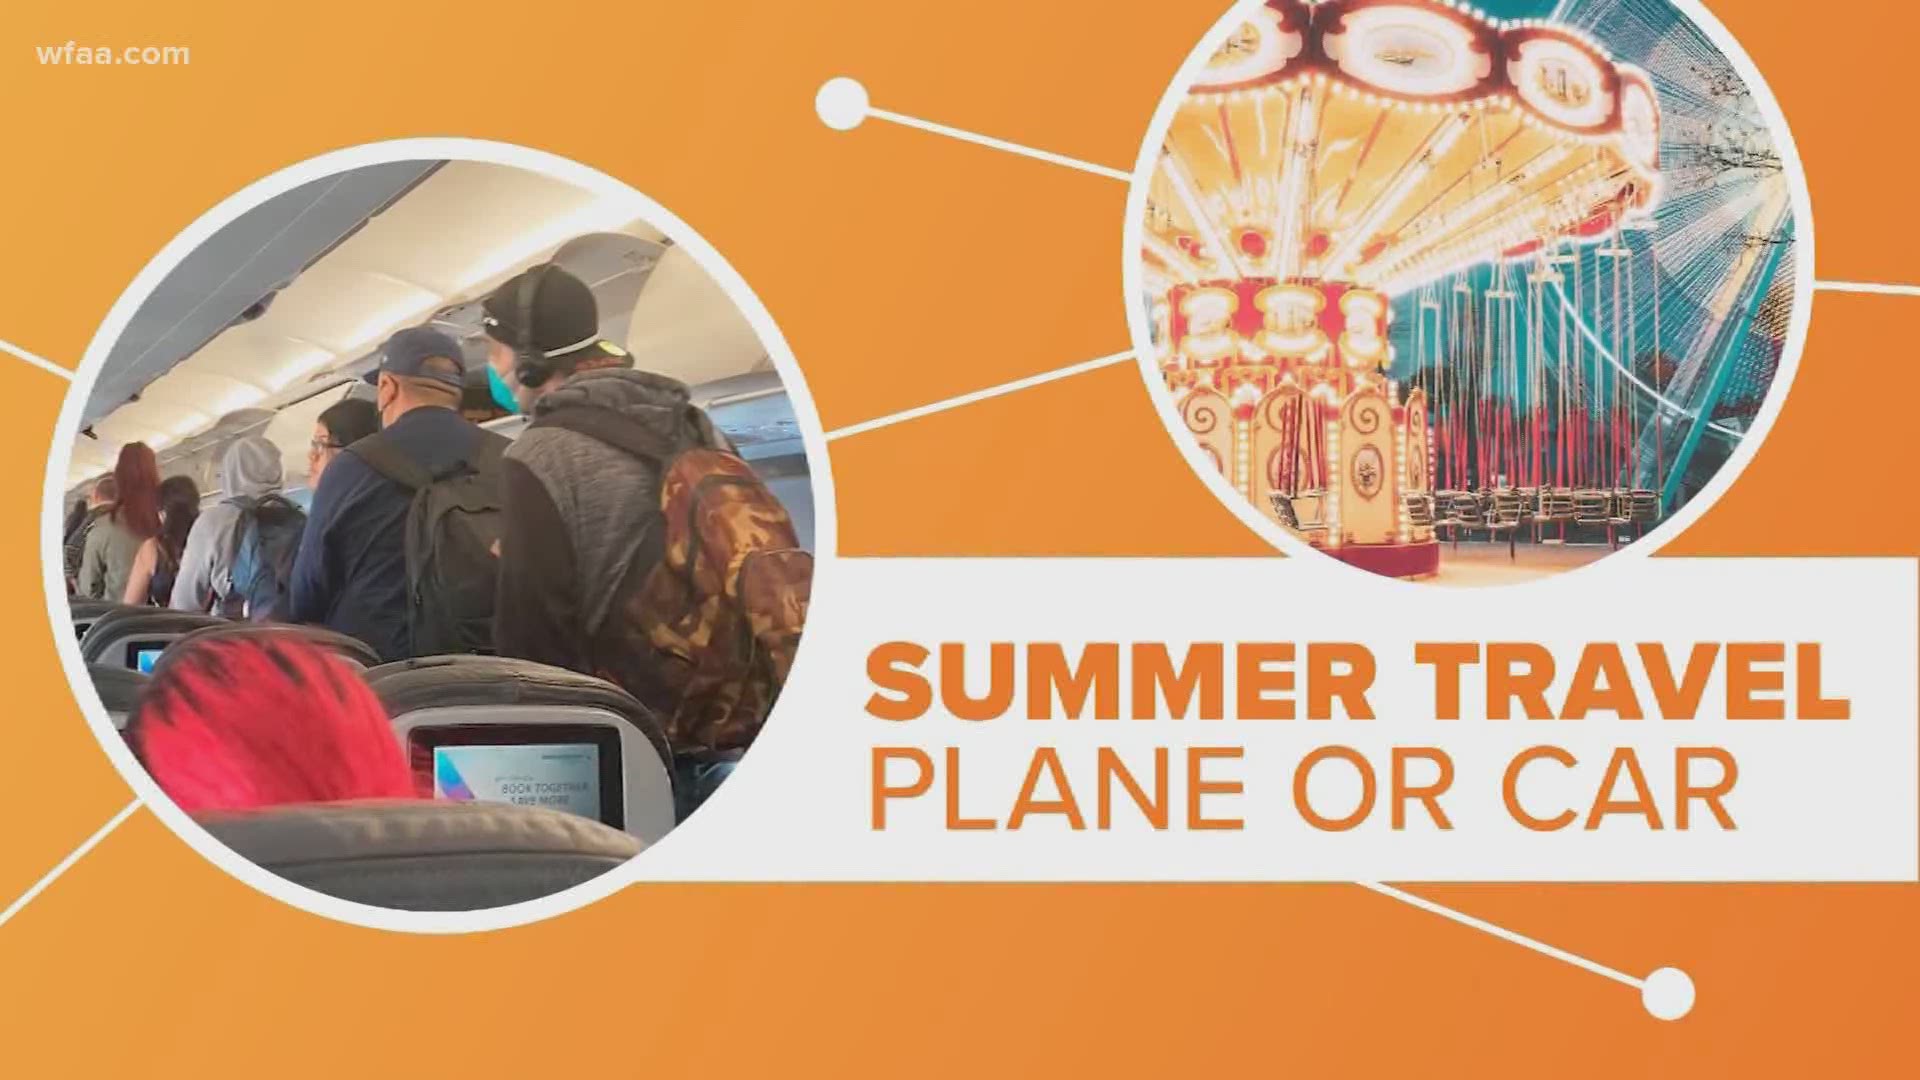 We take a look at whether it's safer to travel by car or plane for summer vacation during the COVID-19 pandemic.